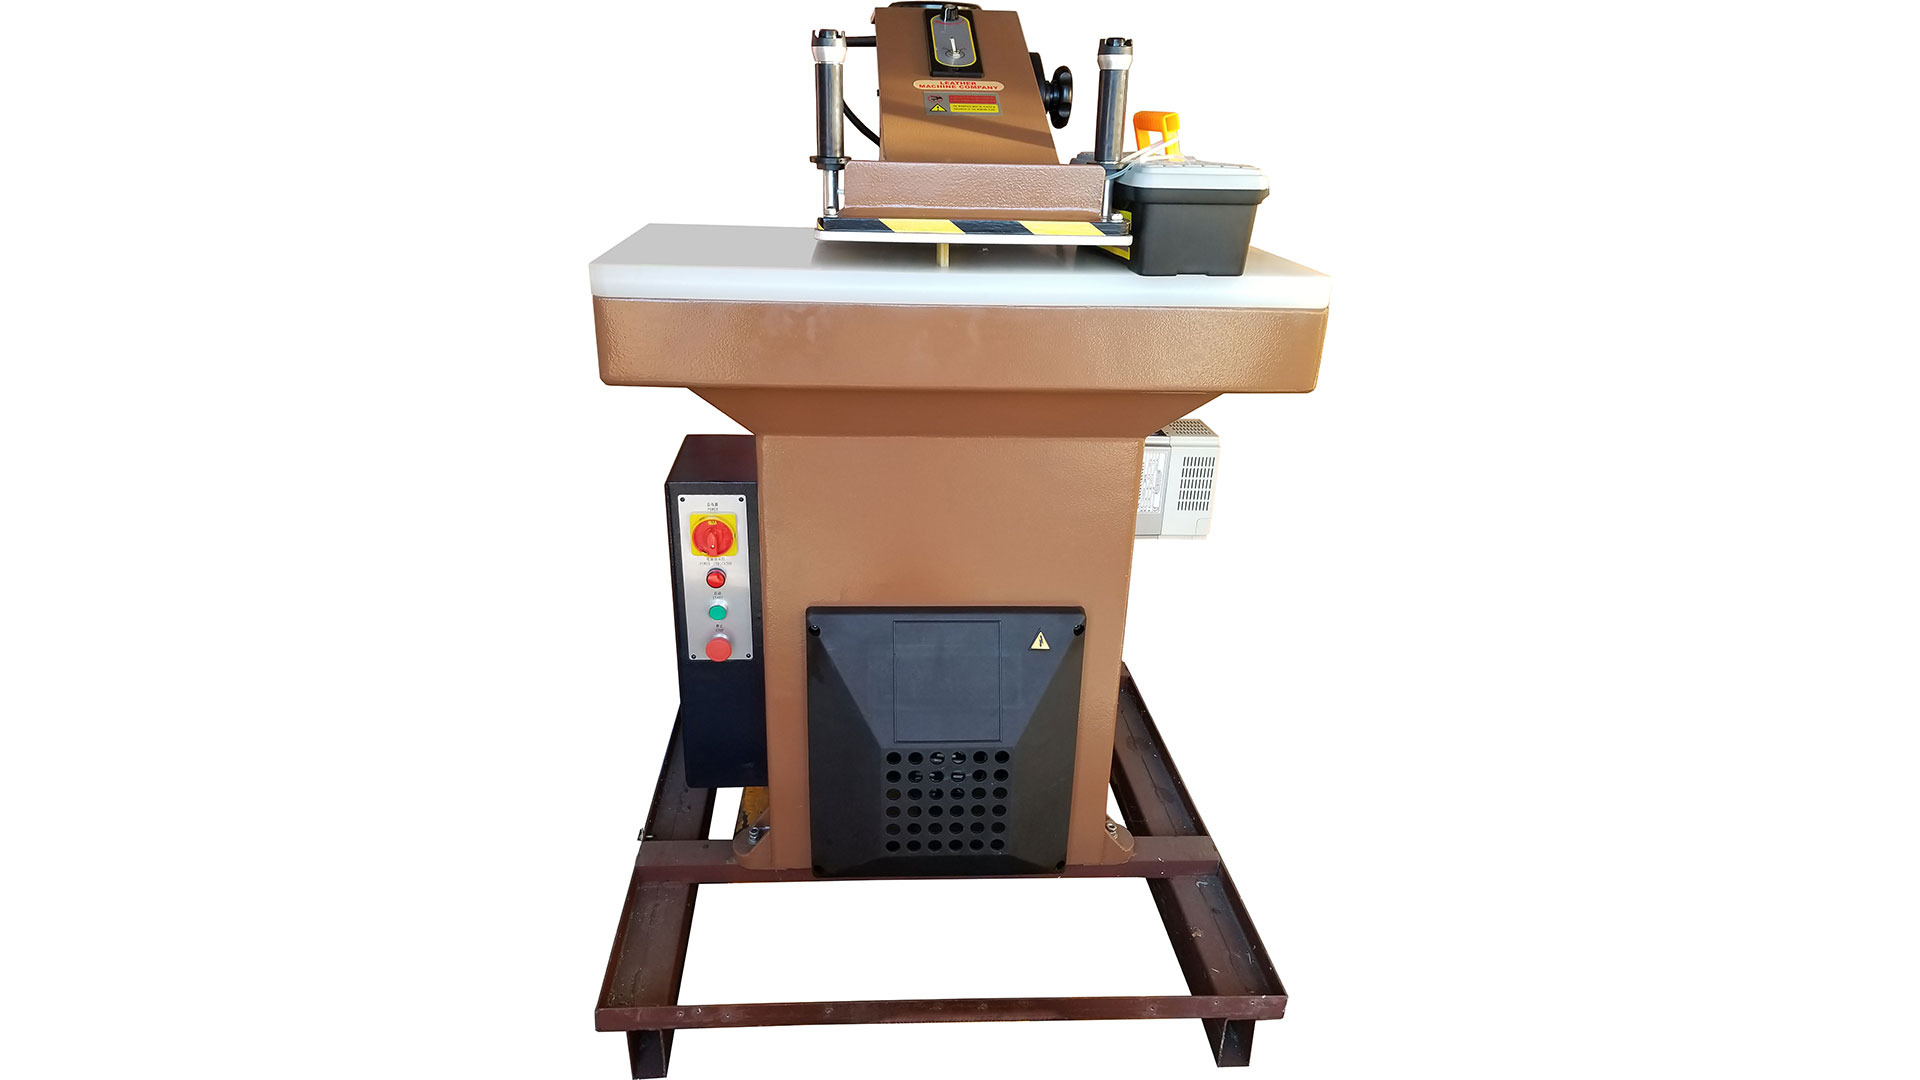 TandyPro 5-Ton Clicker Press from Tandy Leather